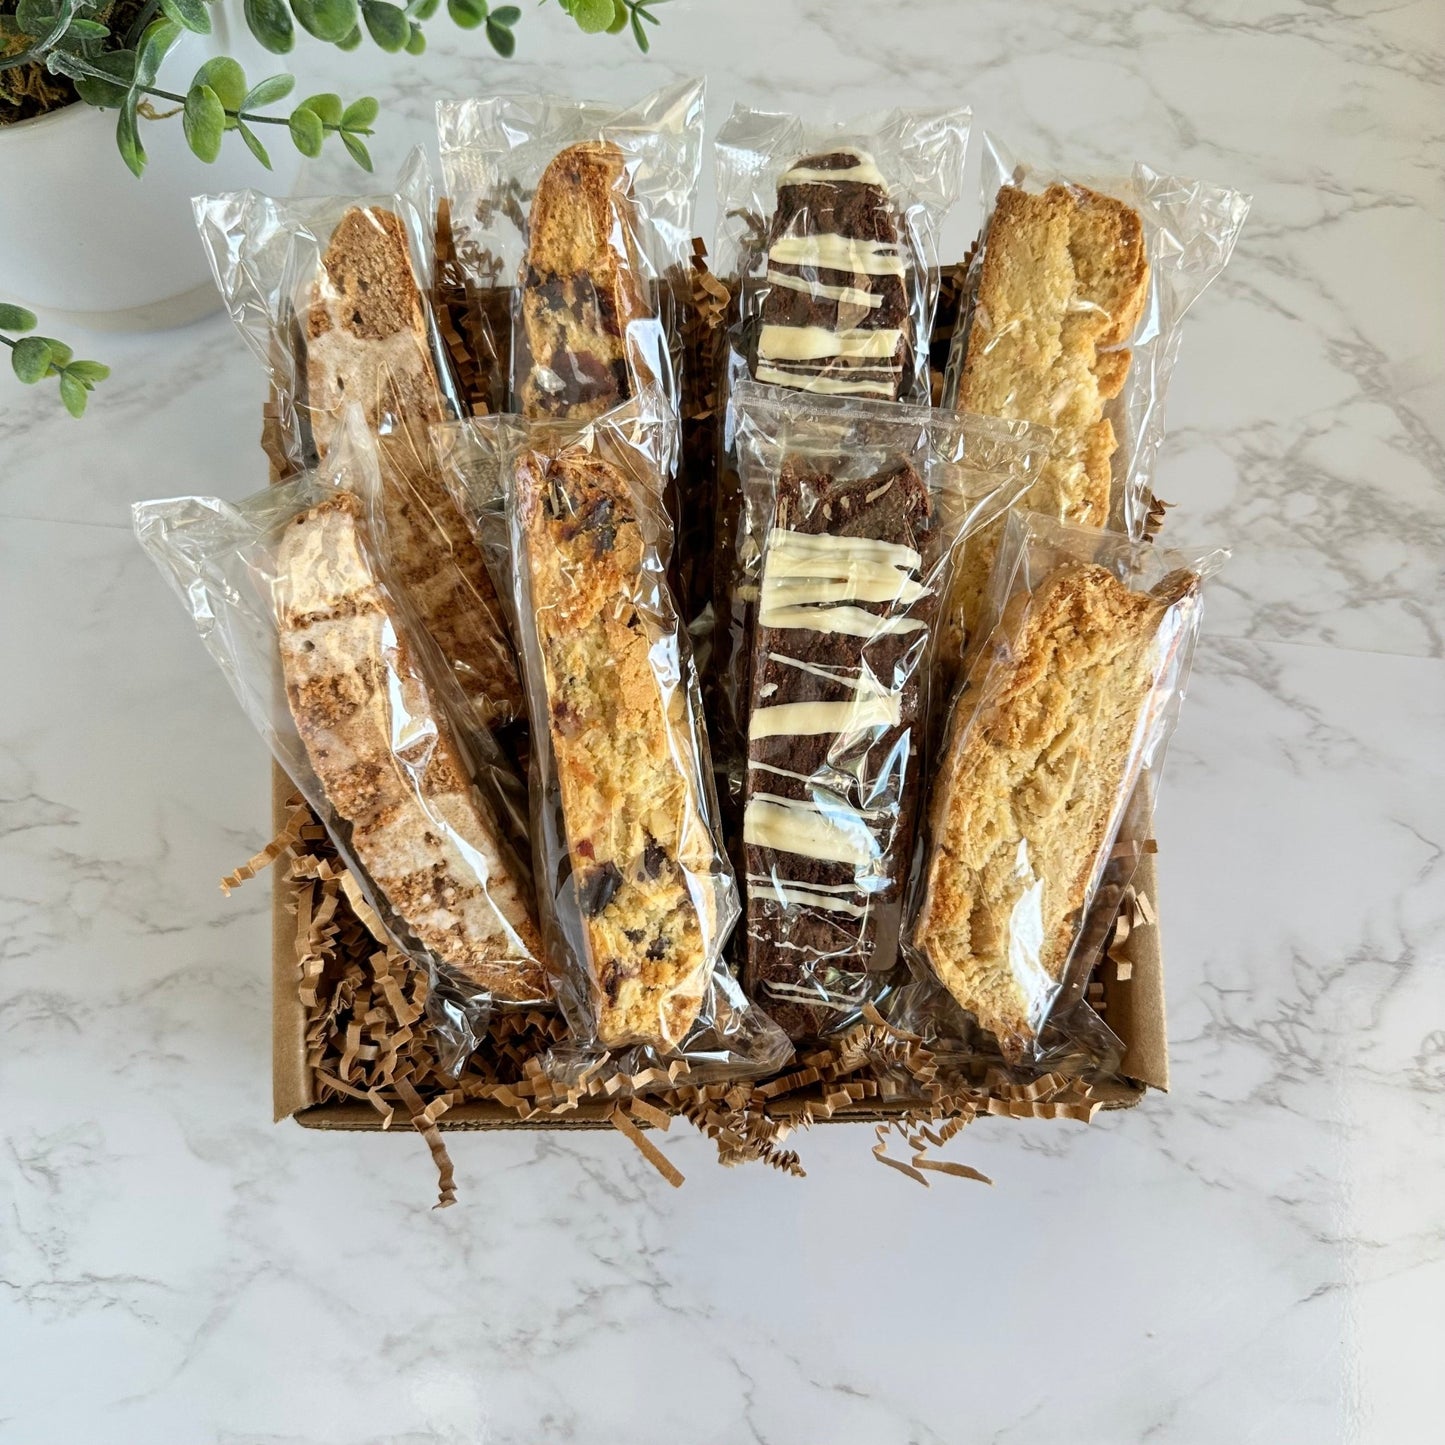 Handmade Italian Biscotti Gift Box | Set of 8 Corporate Gift Baskets - The Meeting Place on Market